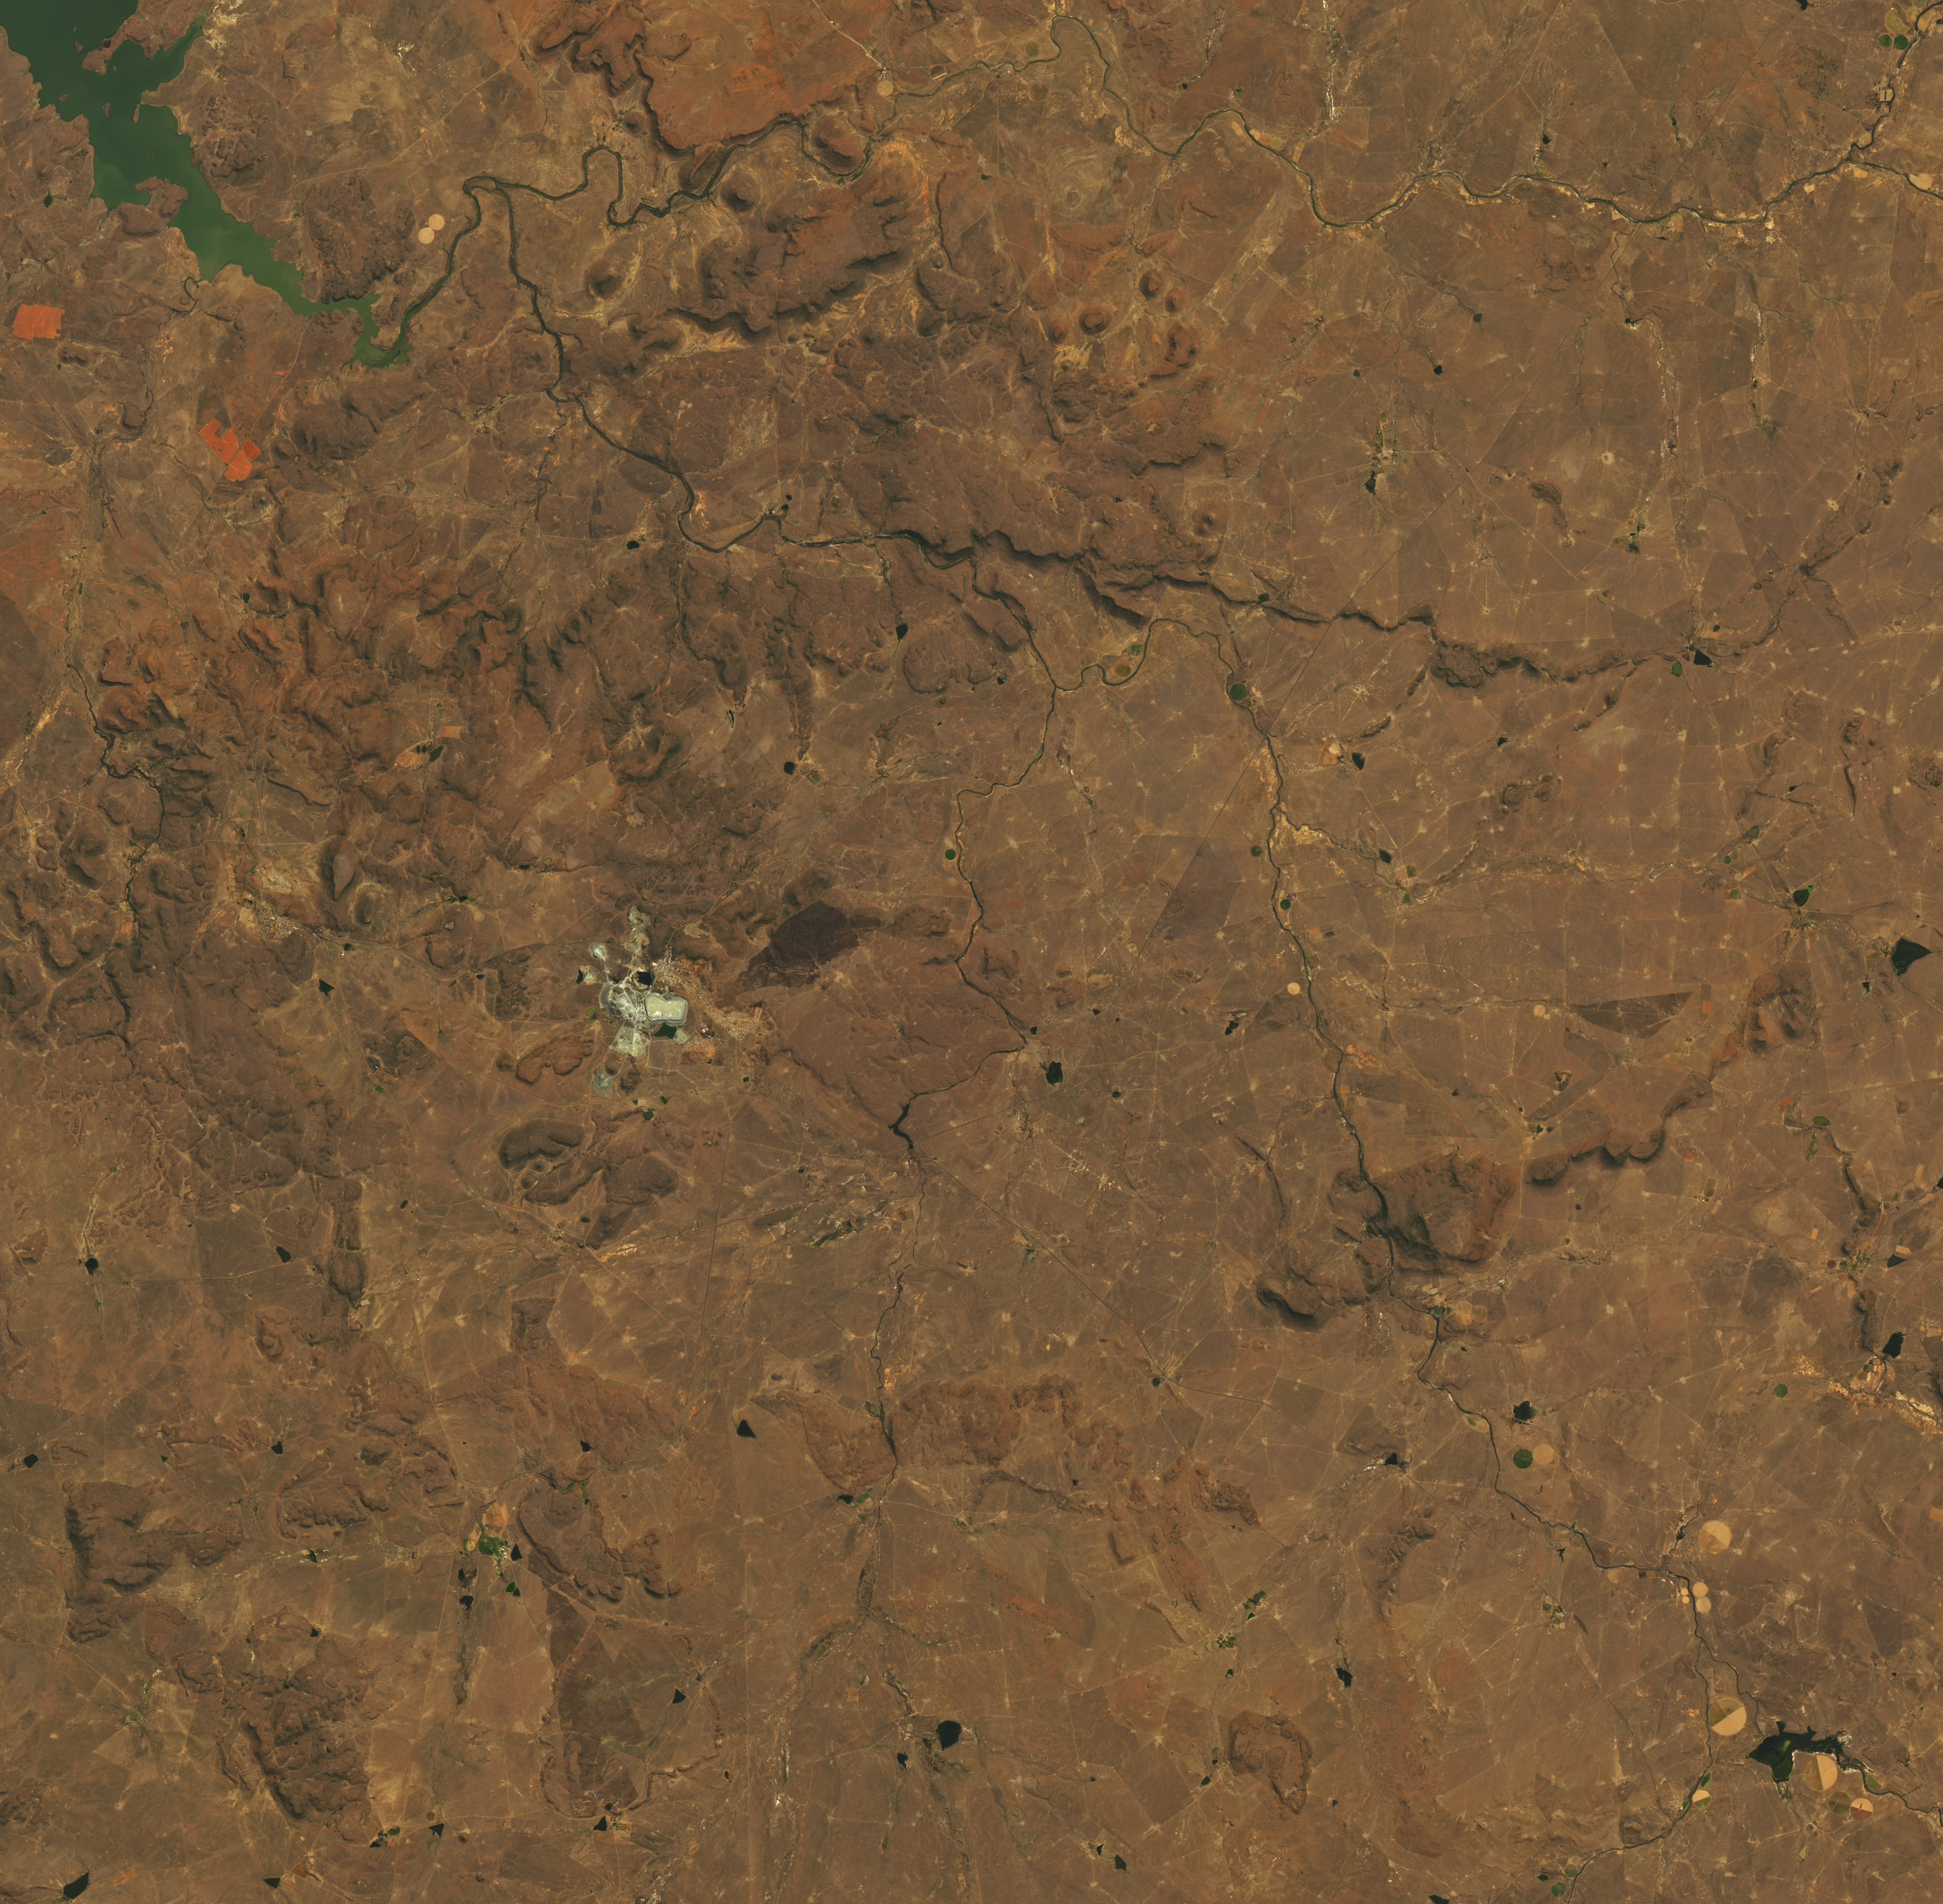 Jagersfontein Covered in Mining Waste - related image preview